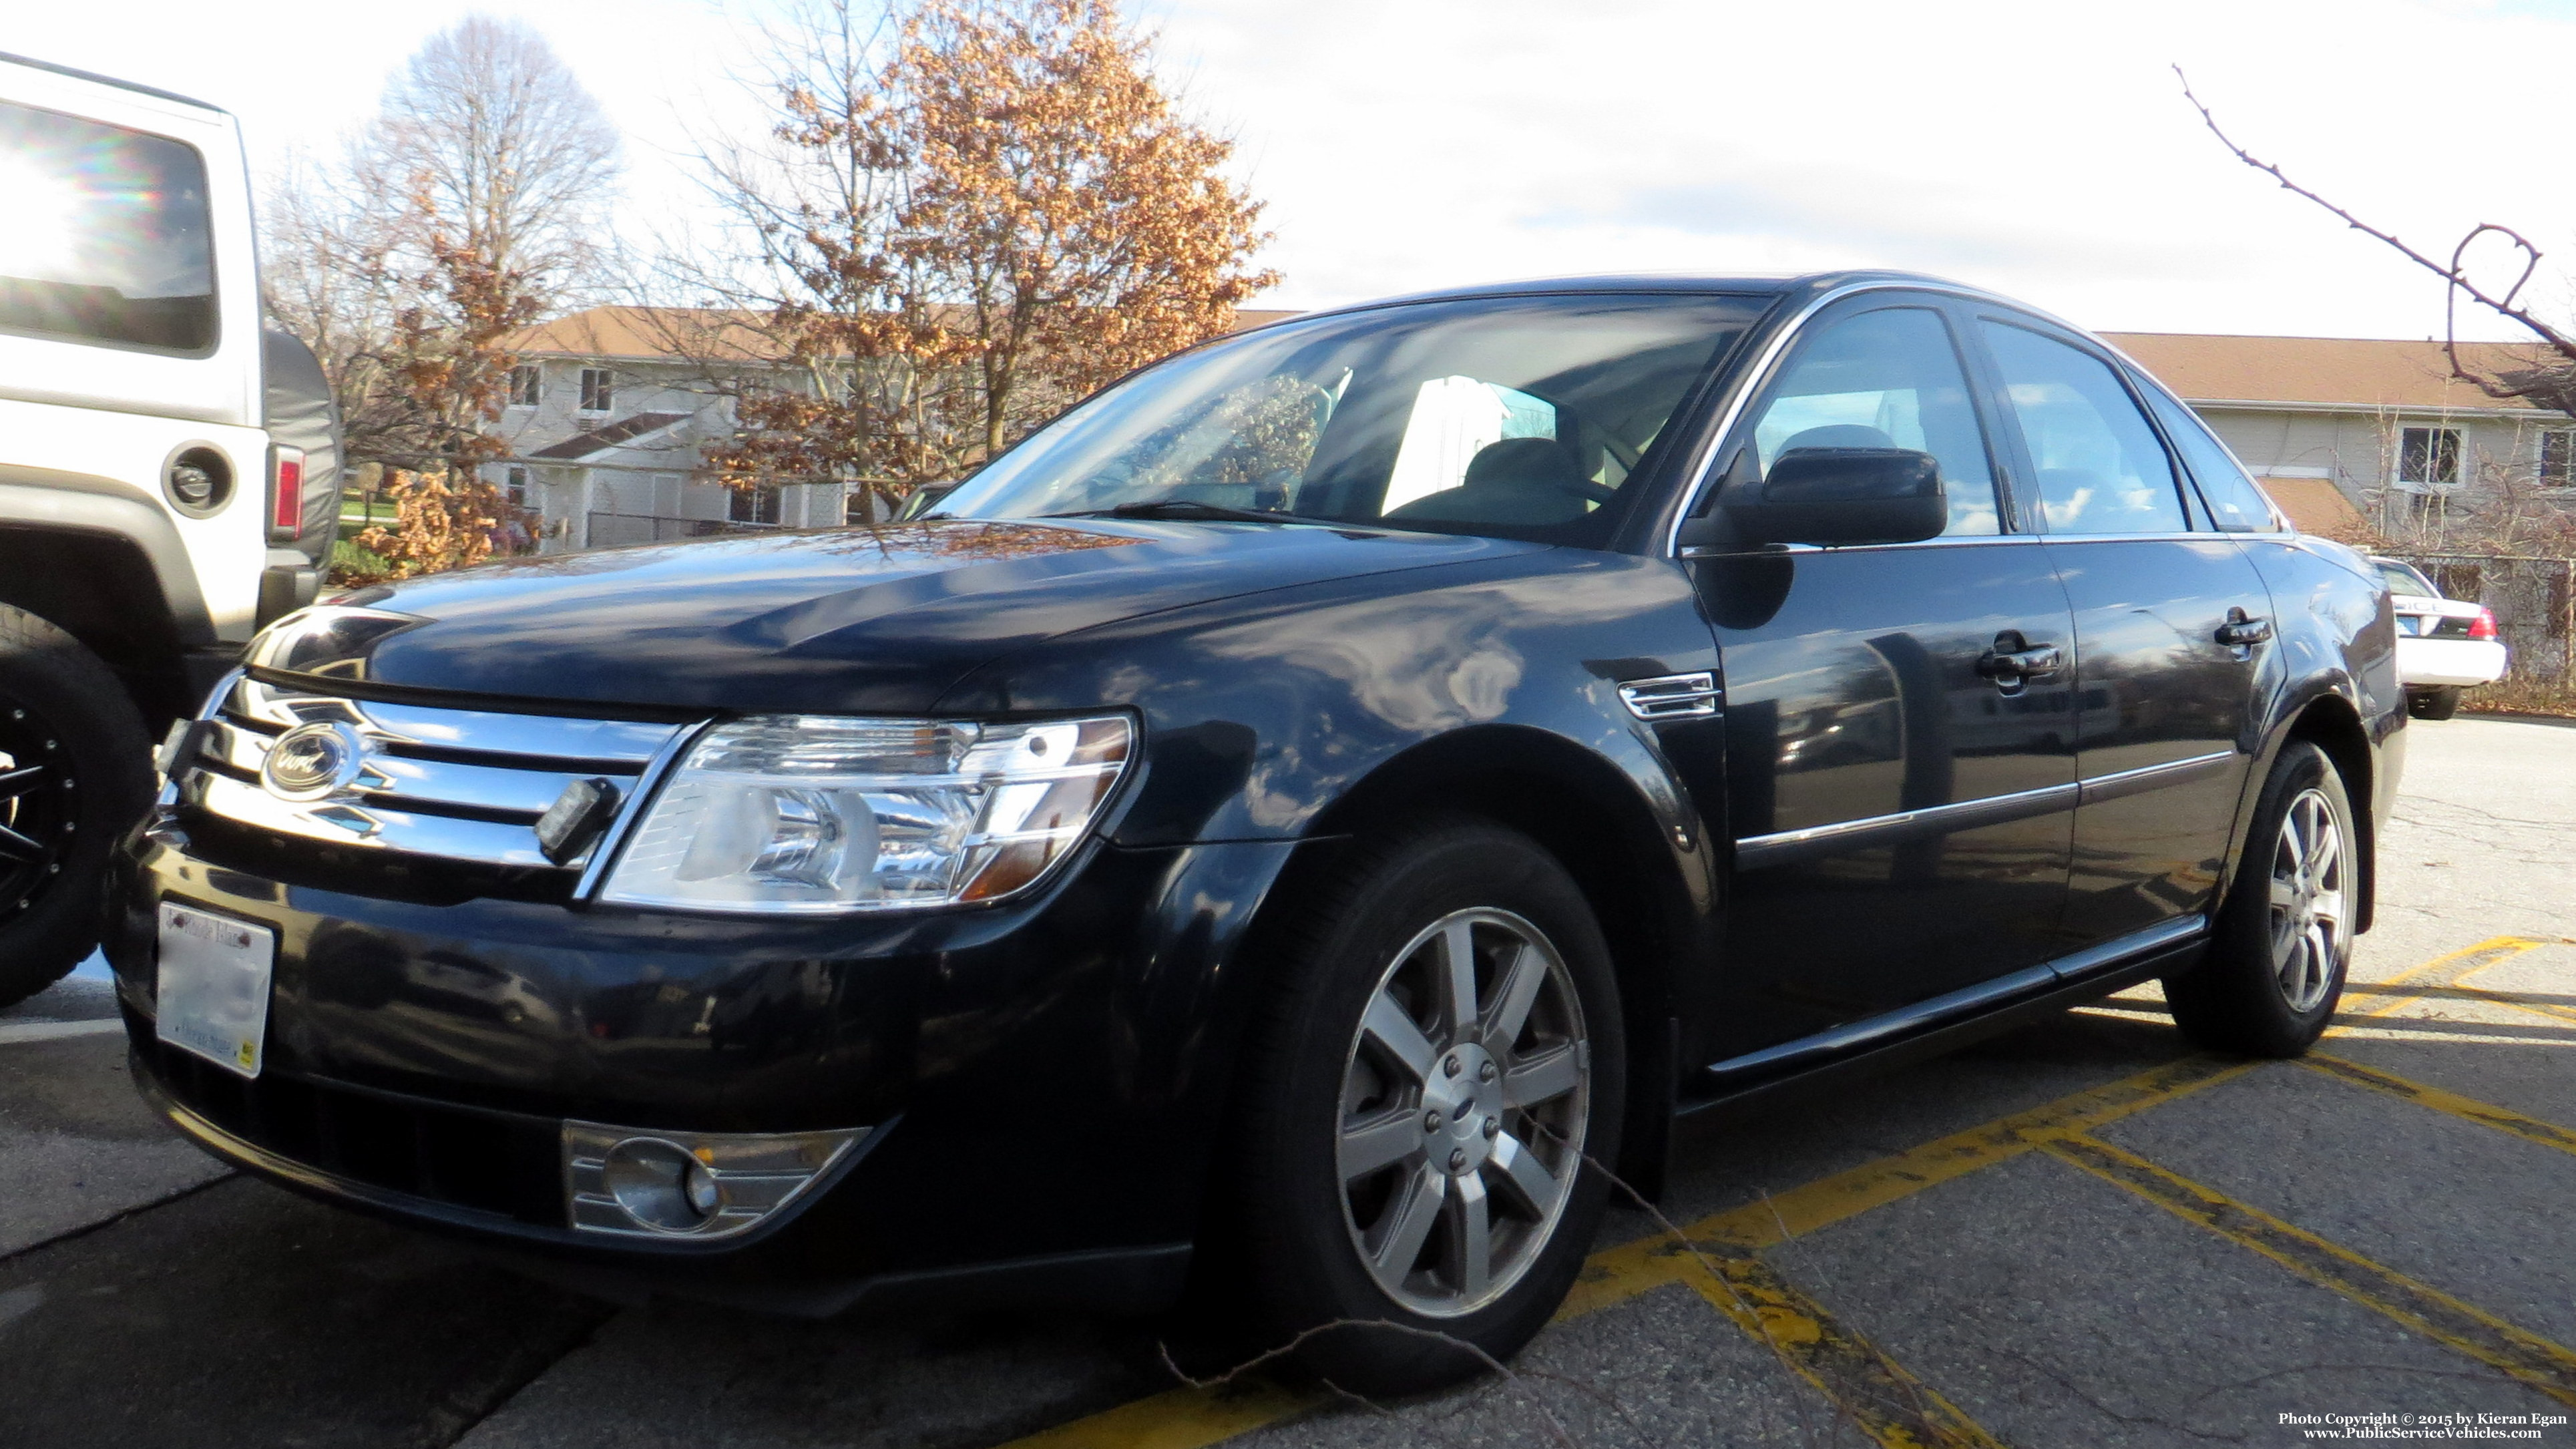 A photo  of North Kingstown Police
            Chief's Unit, a 2008-2009 Ford Taurus             taken by Kieran Egan